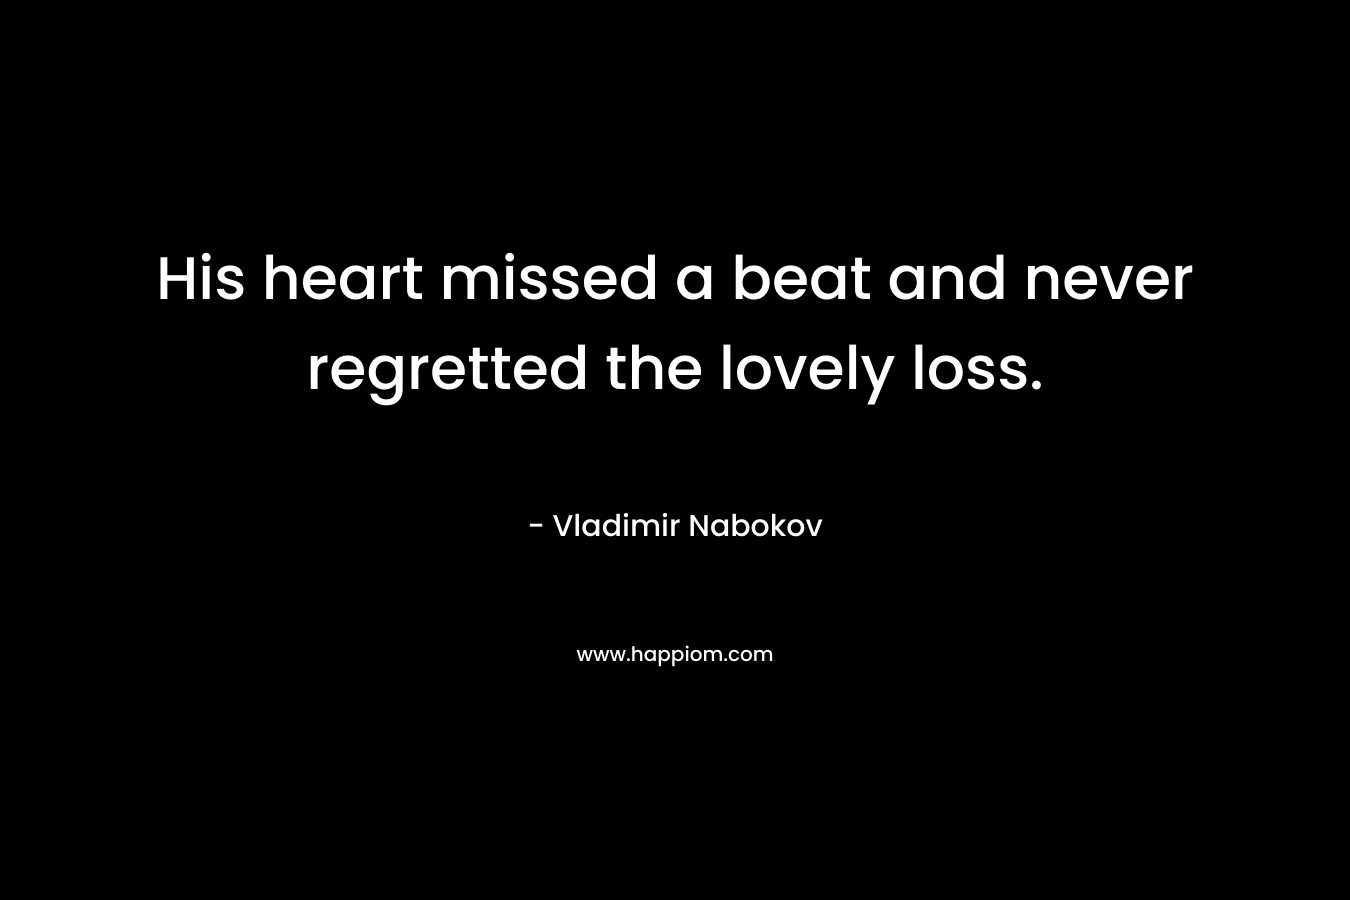 His heart missed a beat and never regretted the lovely loss. – Vladimir Nabokov